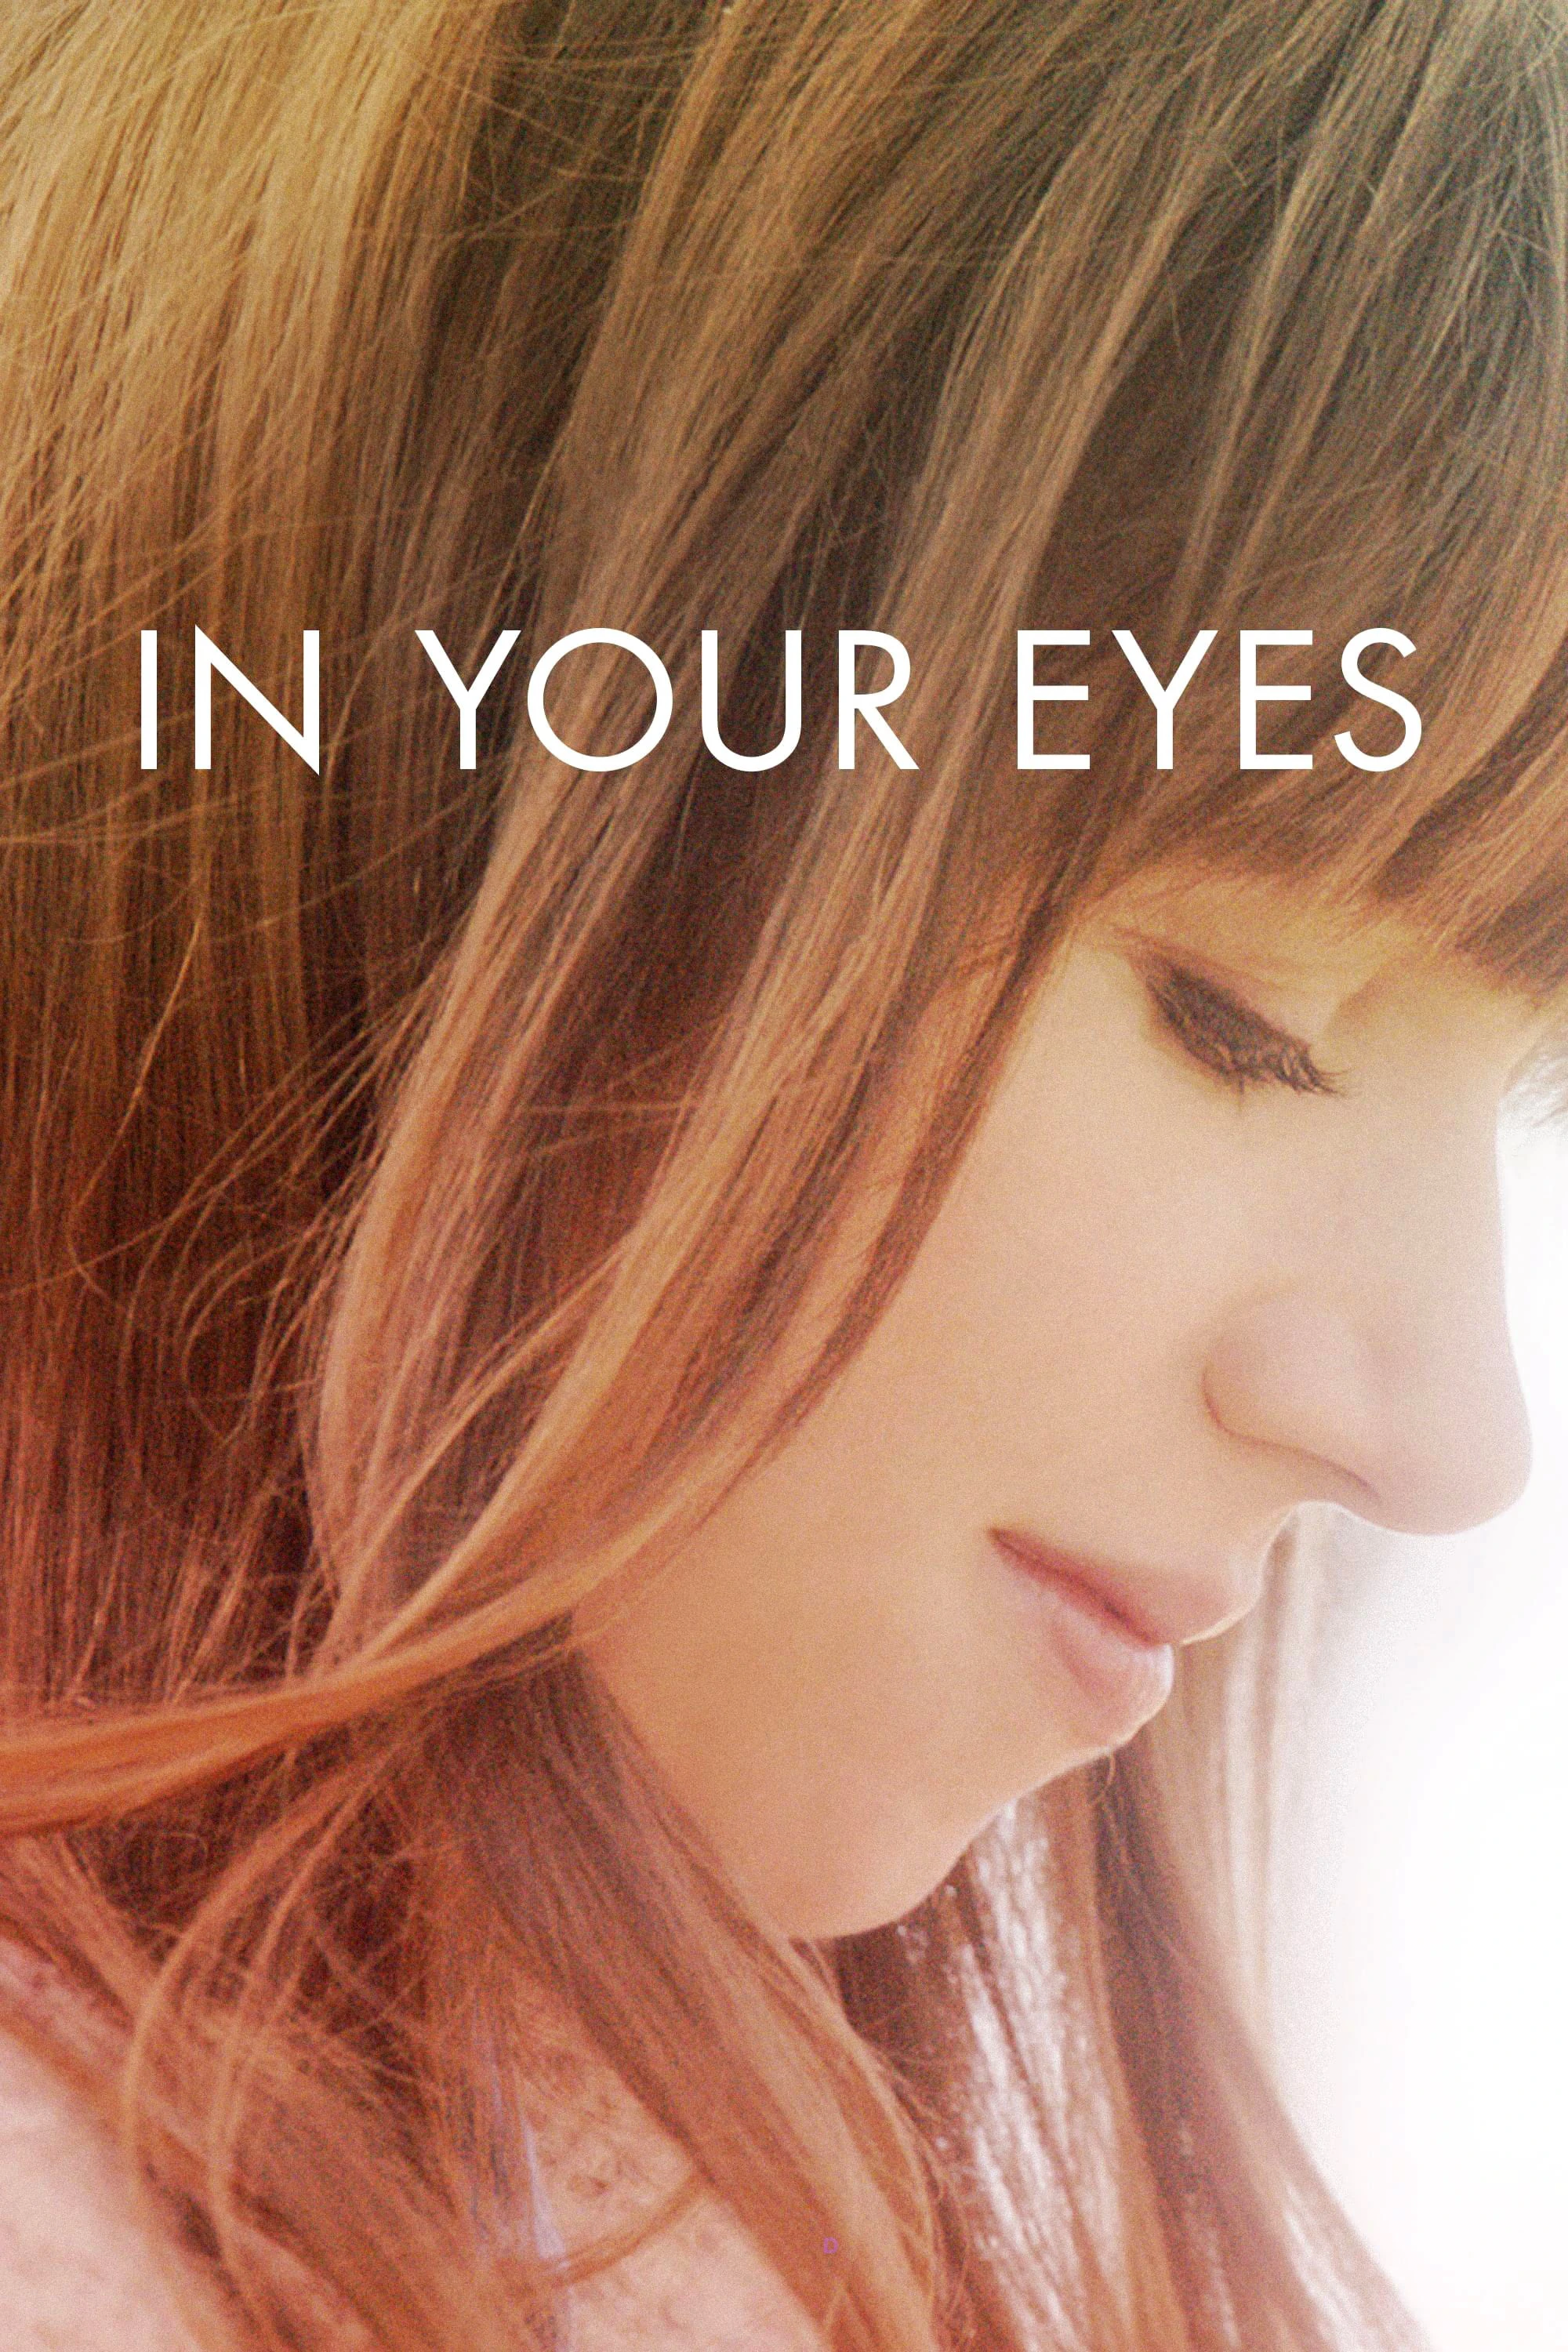 In Your Eyes | In Your Eyes (2014)